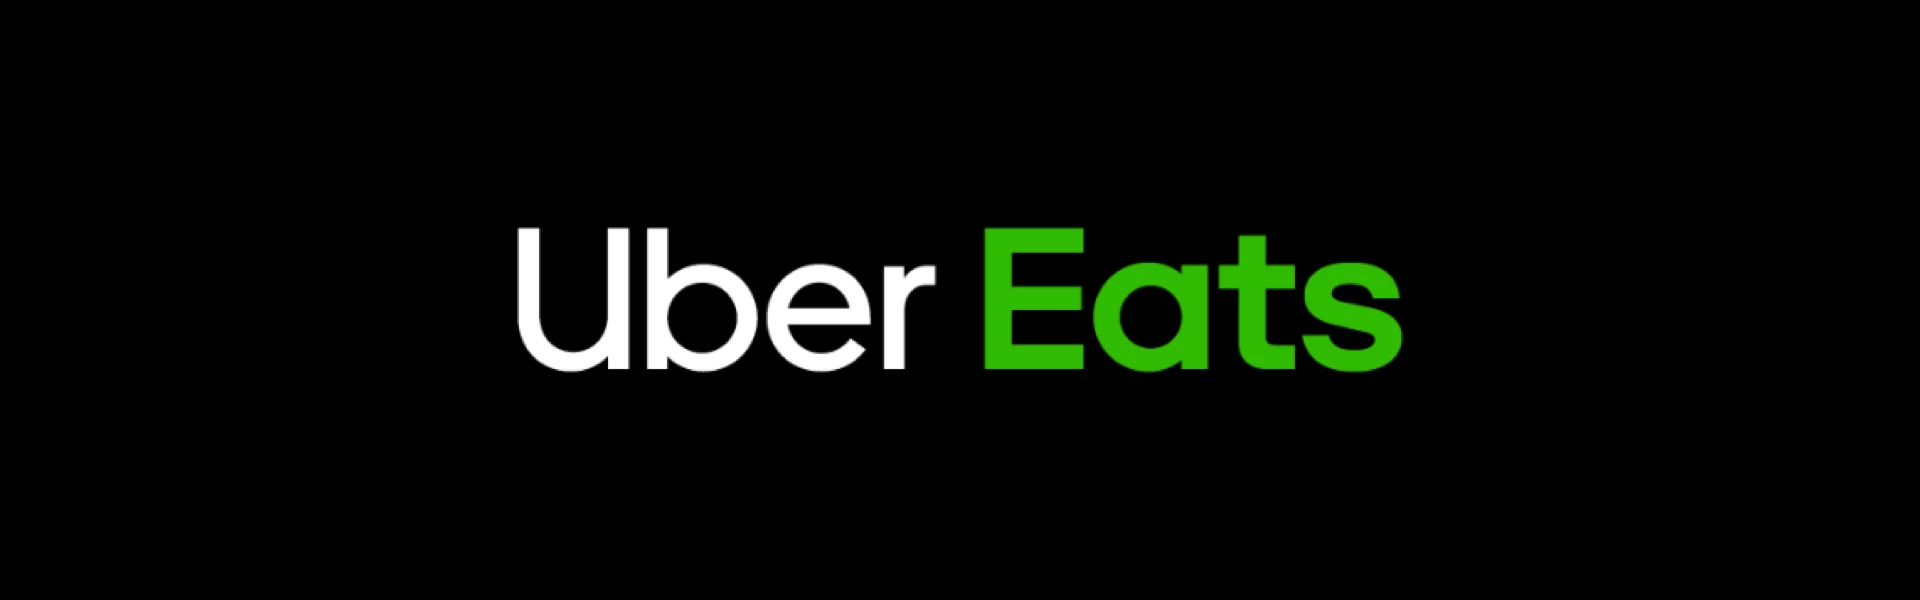 What is the cost of UberEats-like app development?